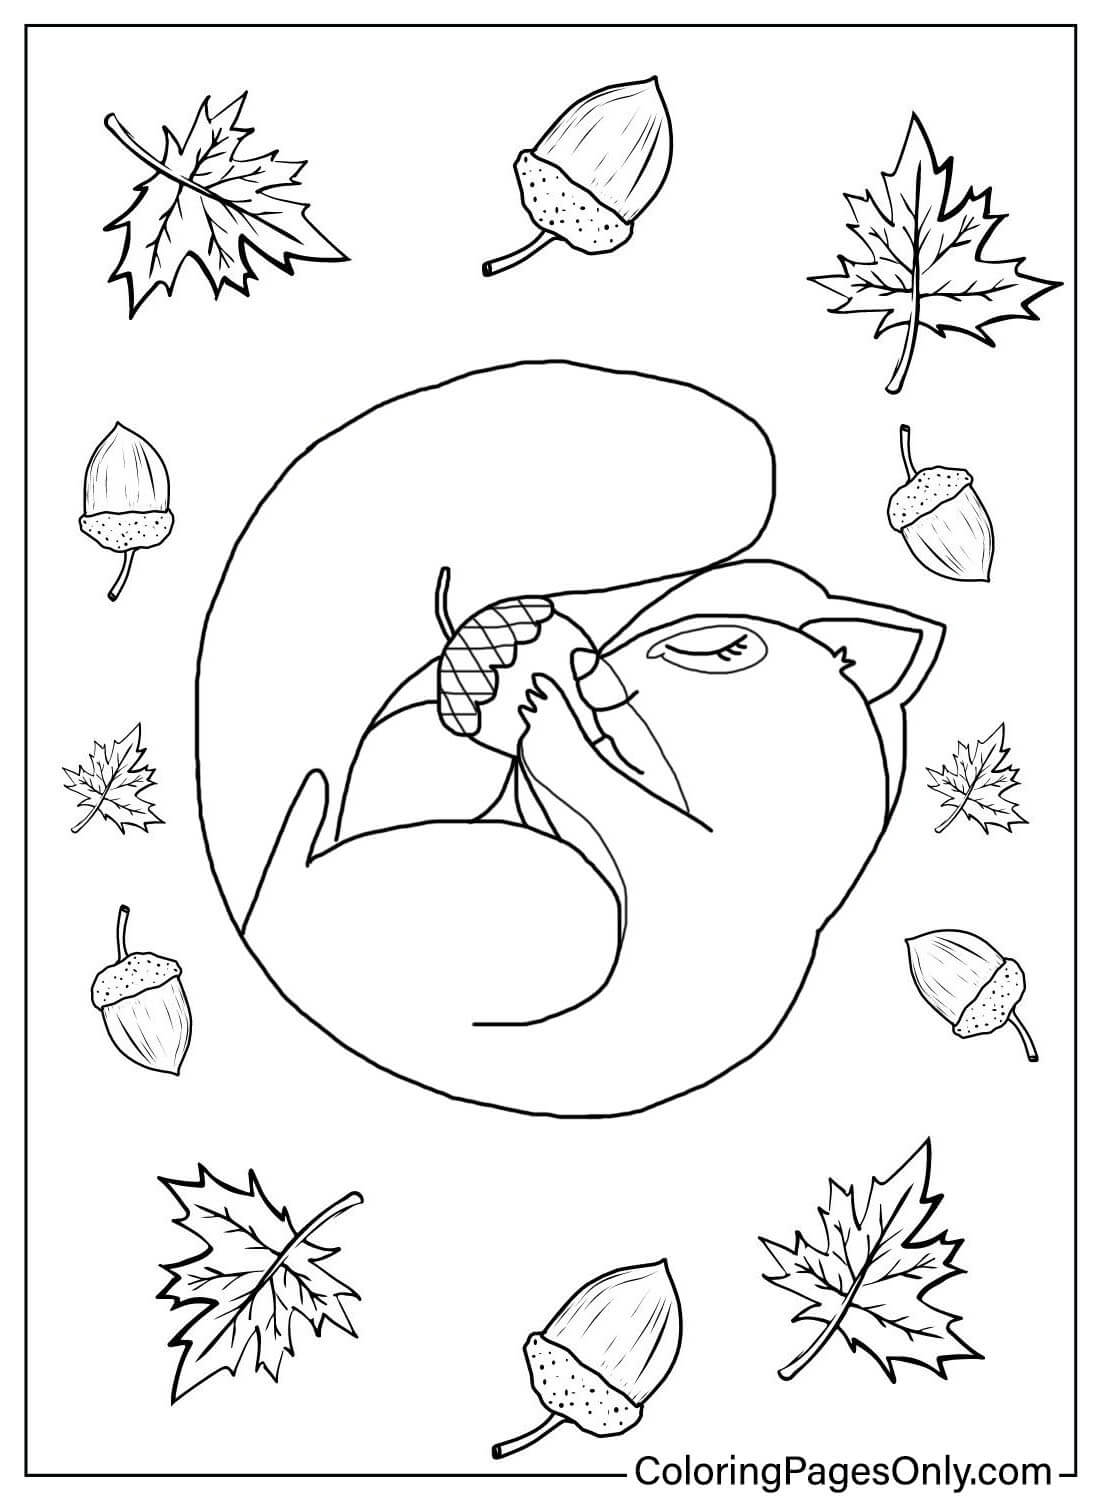 Coloring Page Chipmunk from Chipmunk